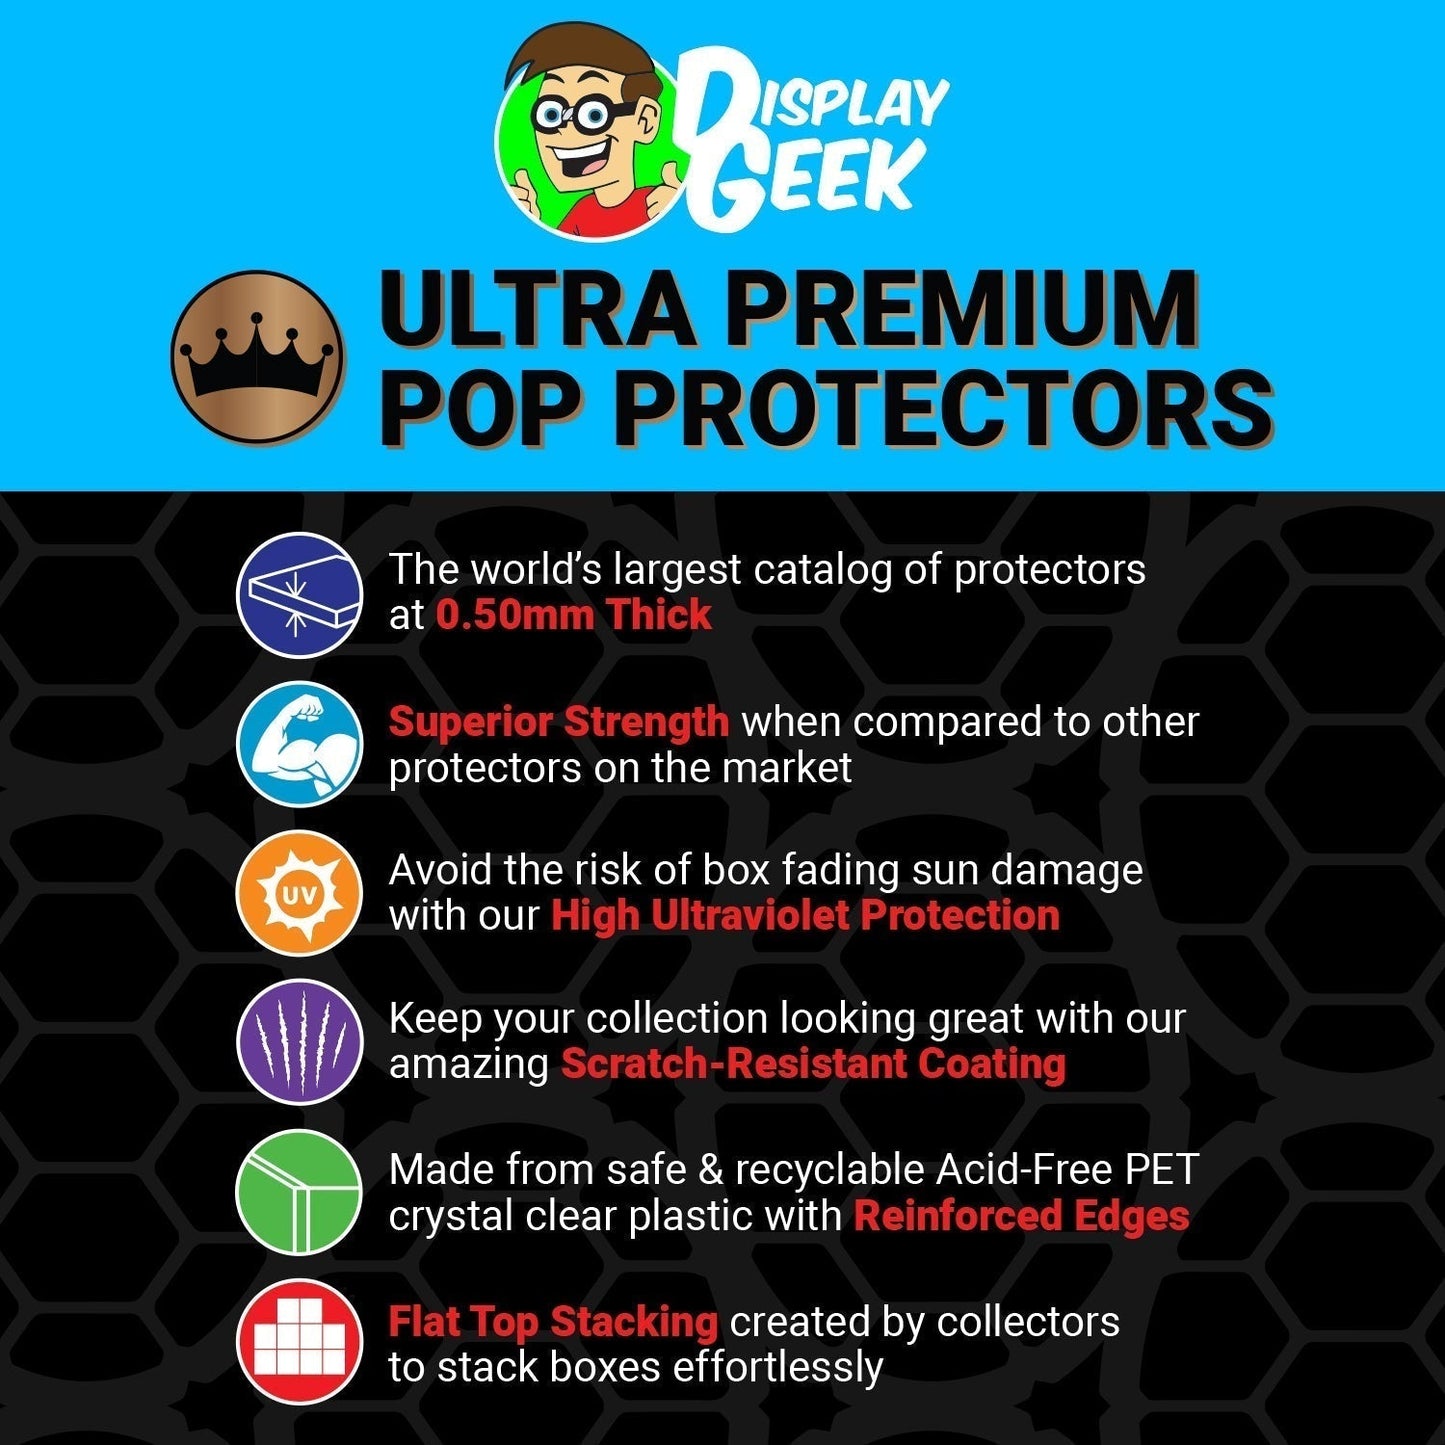 Pop Protector for Evil Queen FunkO's Cereal Box - PPG Pop Protector Guide Search Created by Display Geek